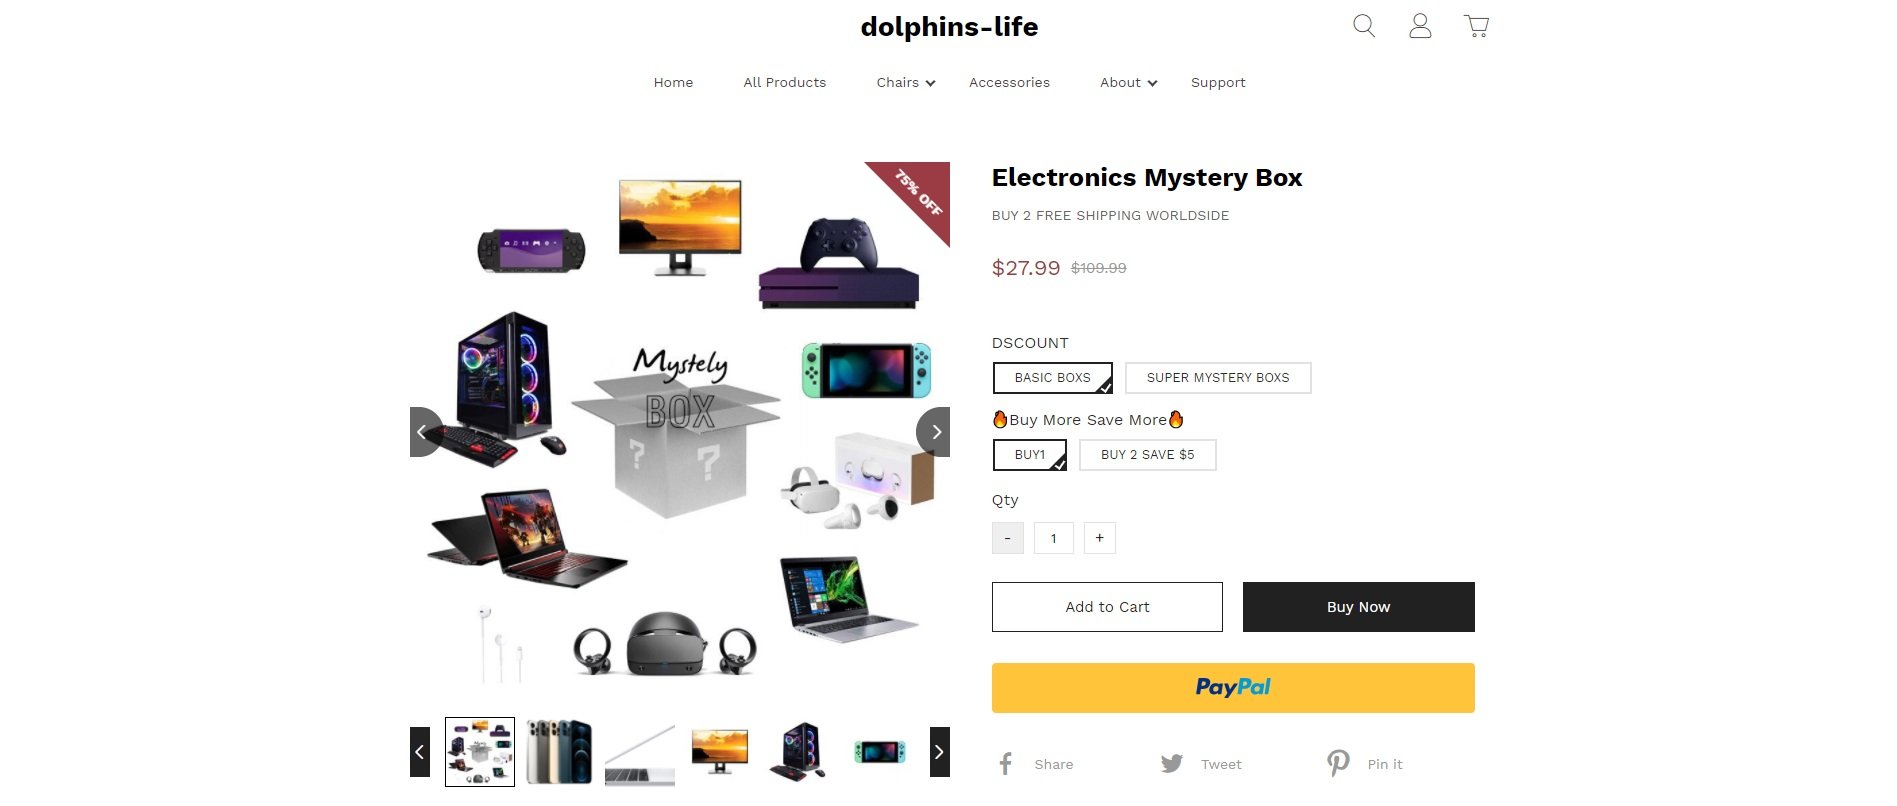 Dolphins Life Shop Mystery Box located at dolphins-life.site